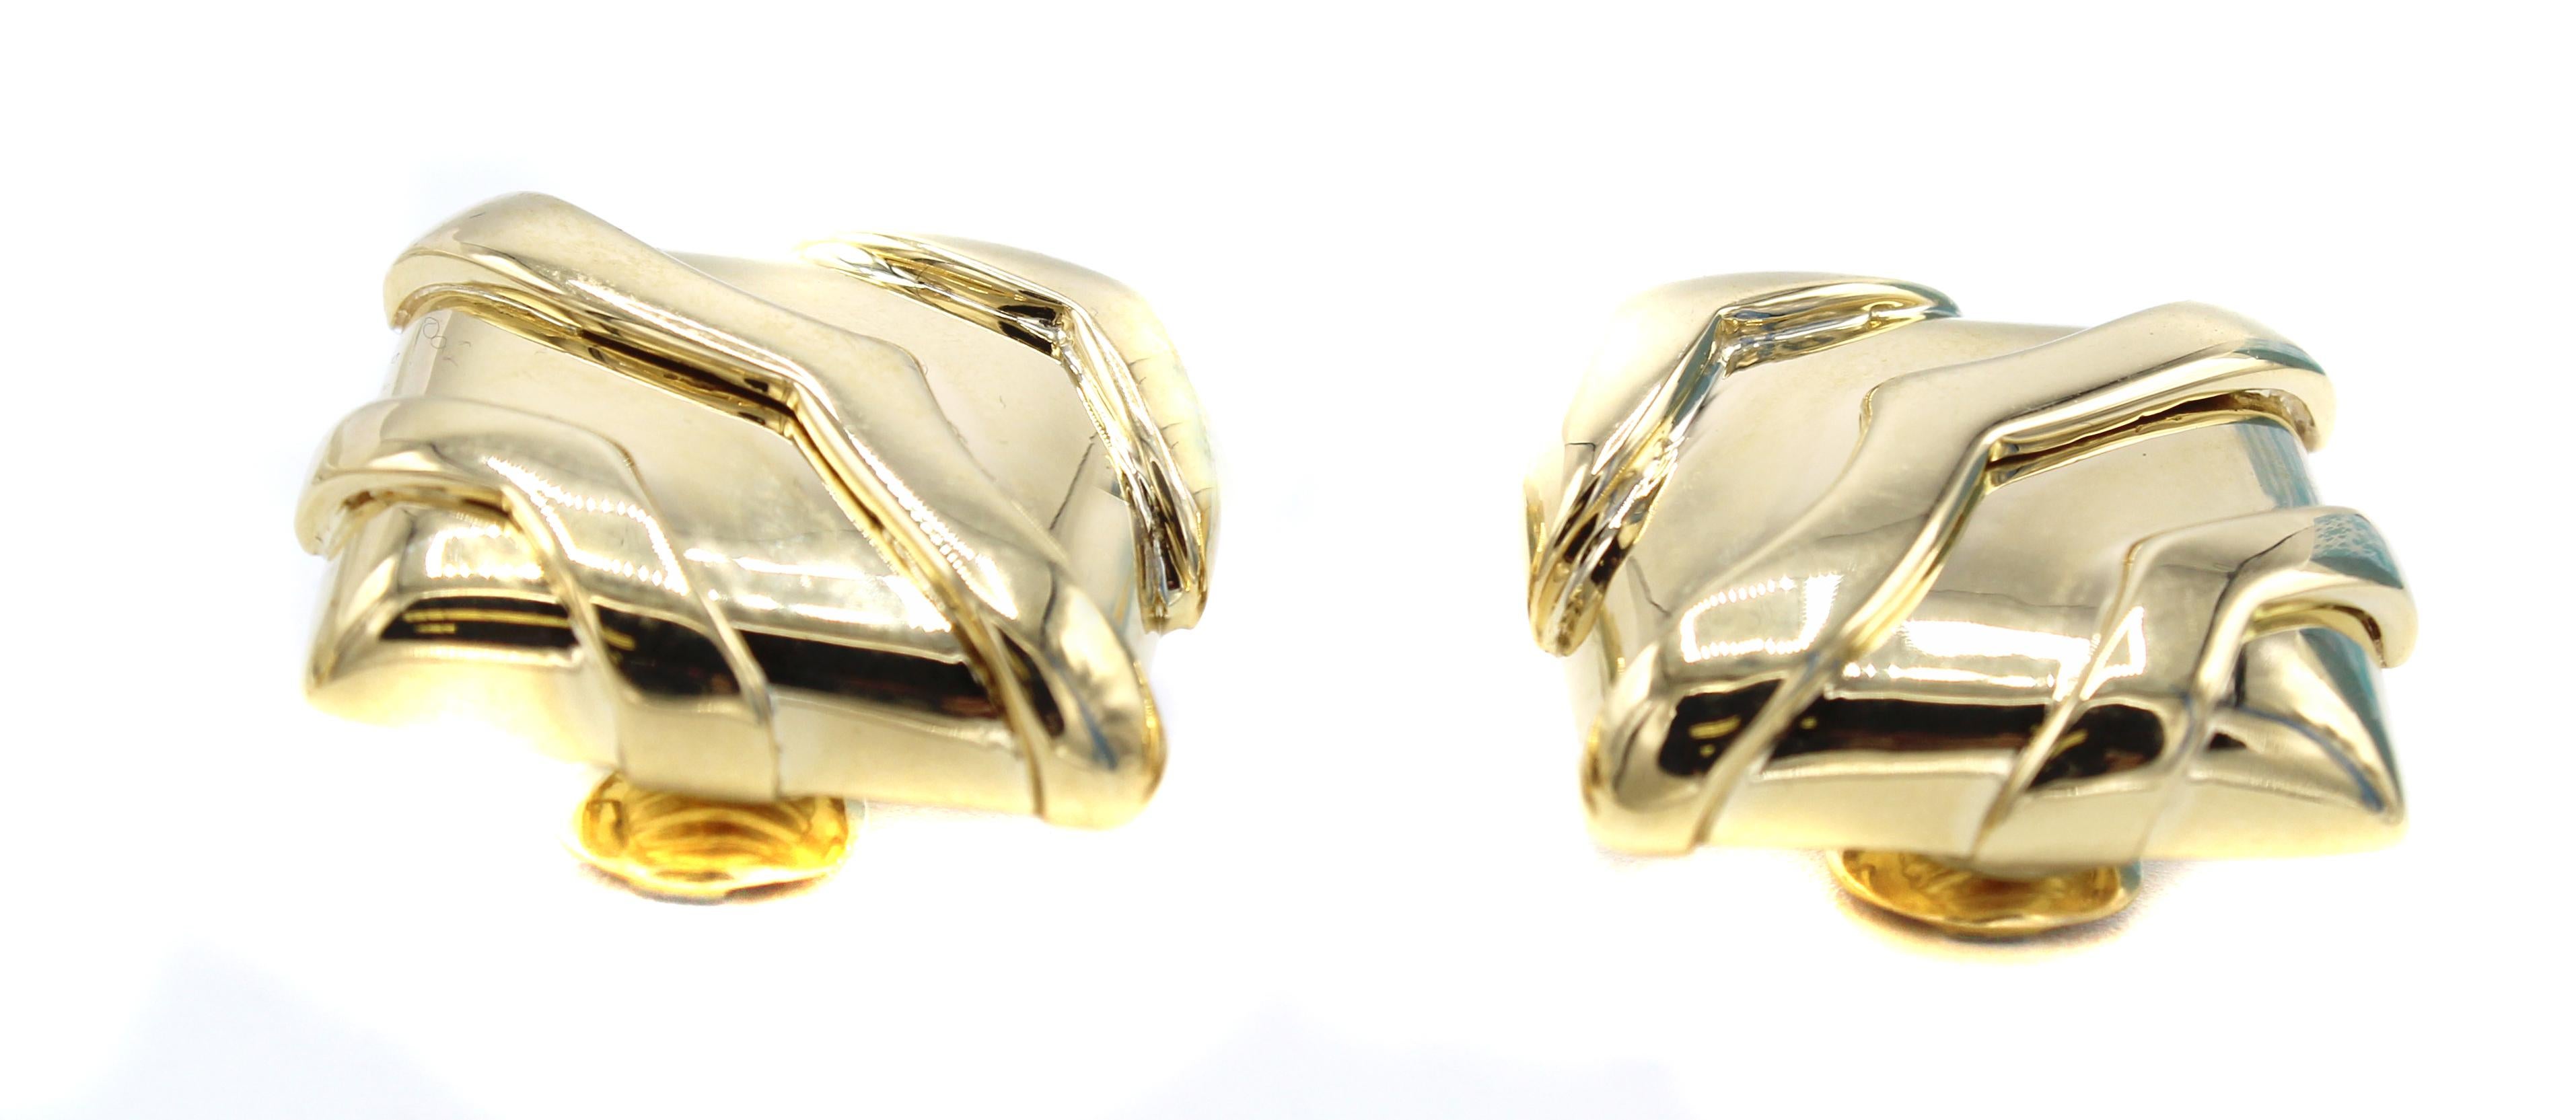 David Webb 18 Karat Gold Ear Clips In Excellent Condition For Sale In New York, NY